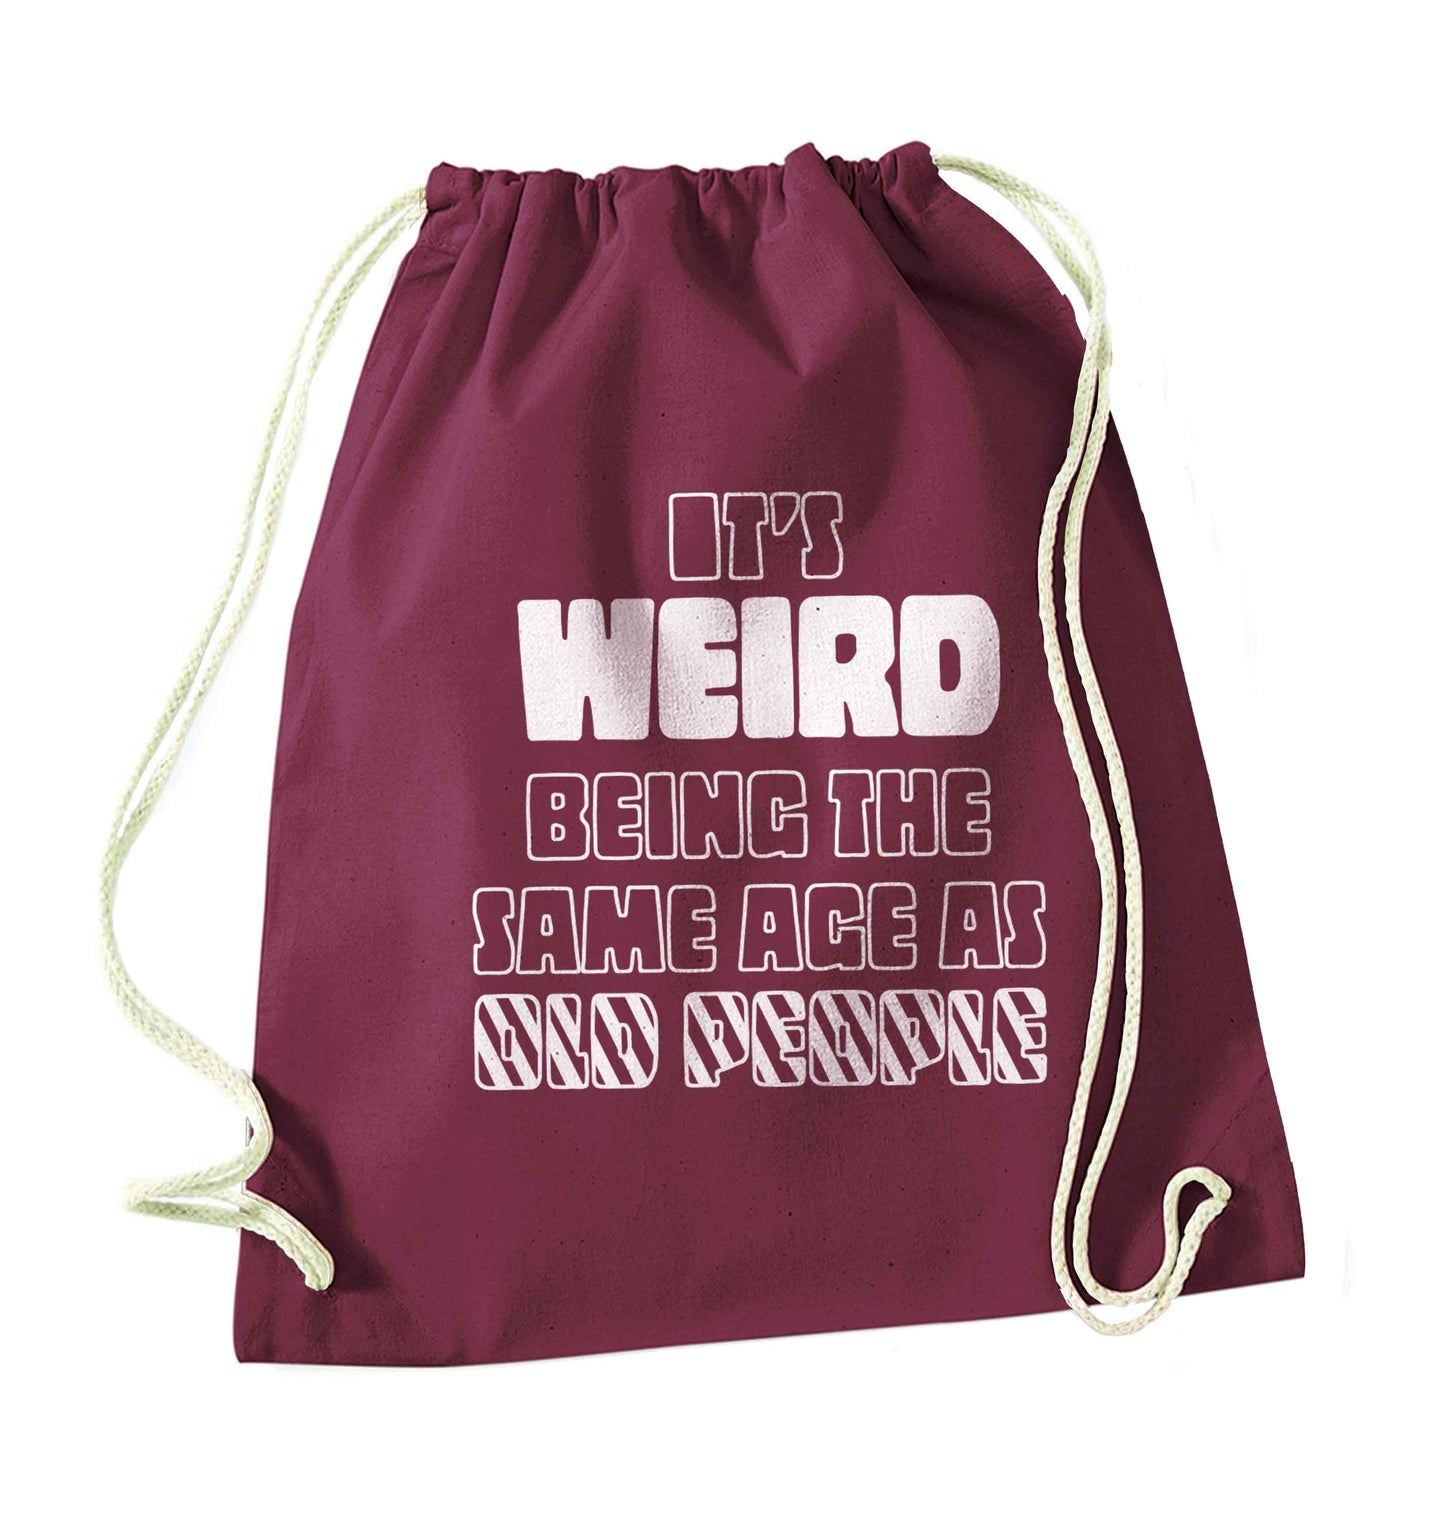 It's weird being the same age as old people maroon drawstring bag